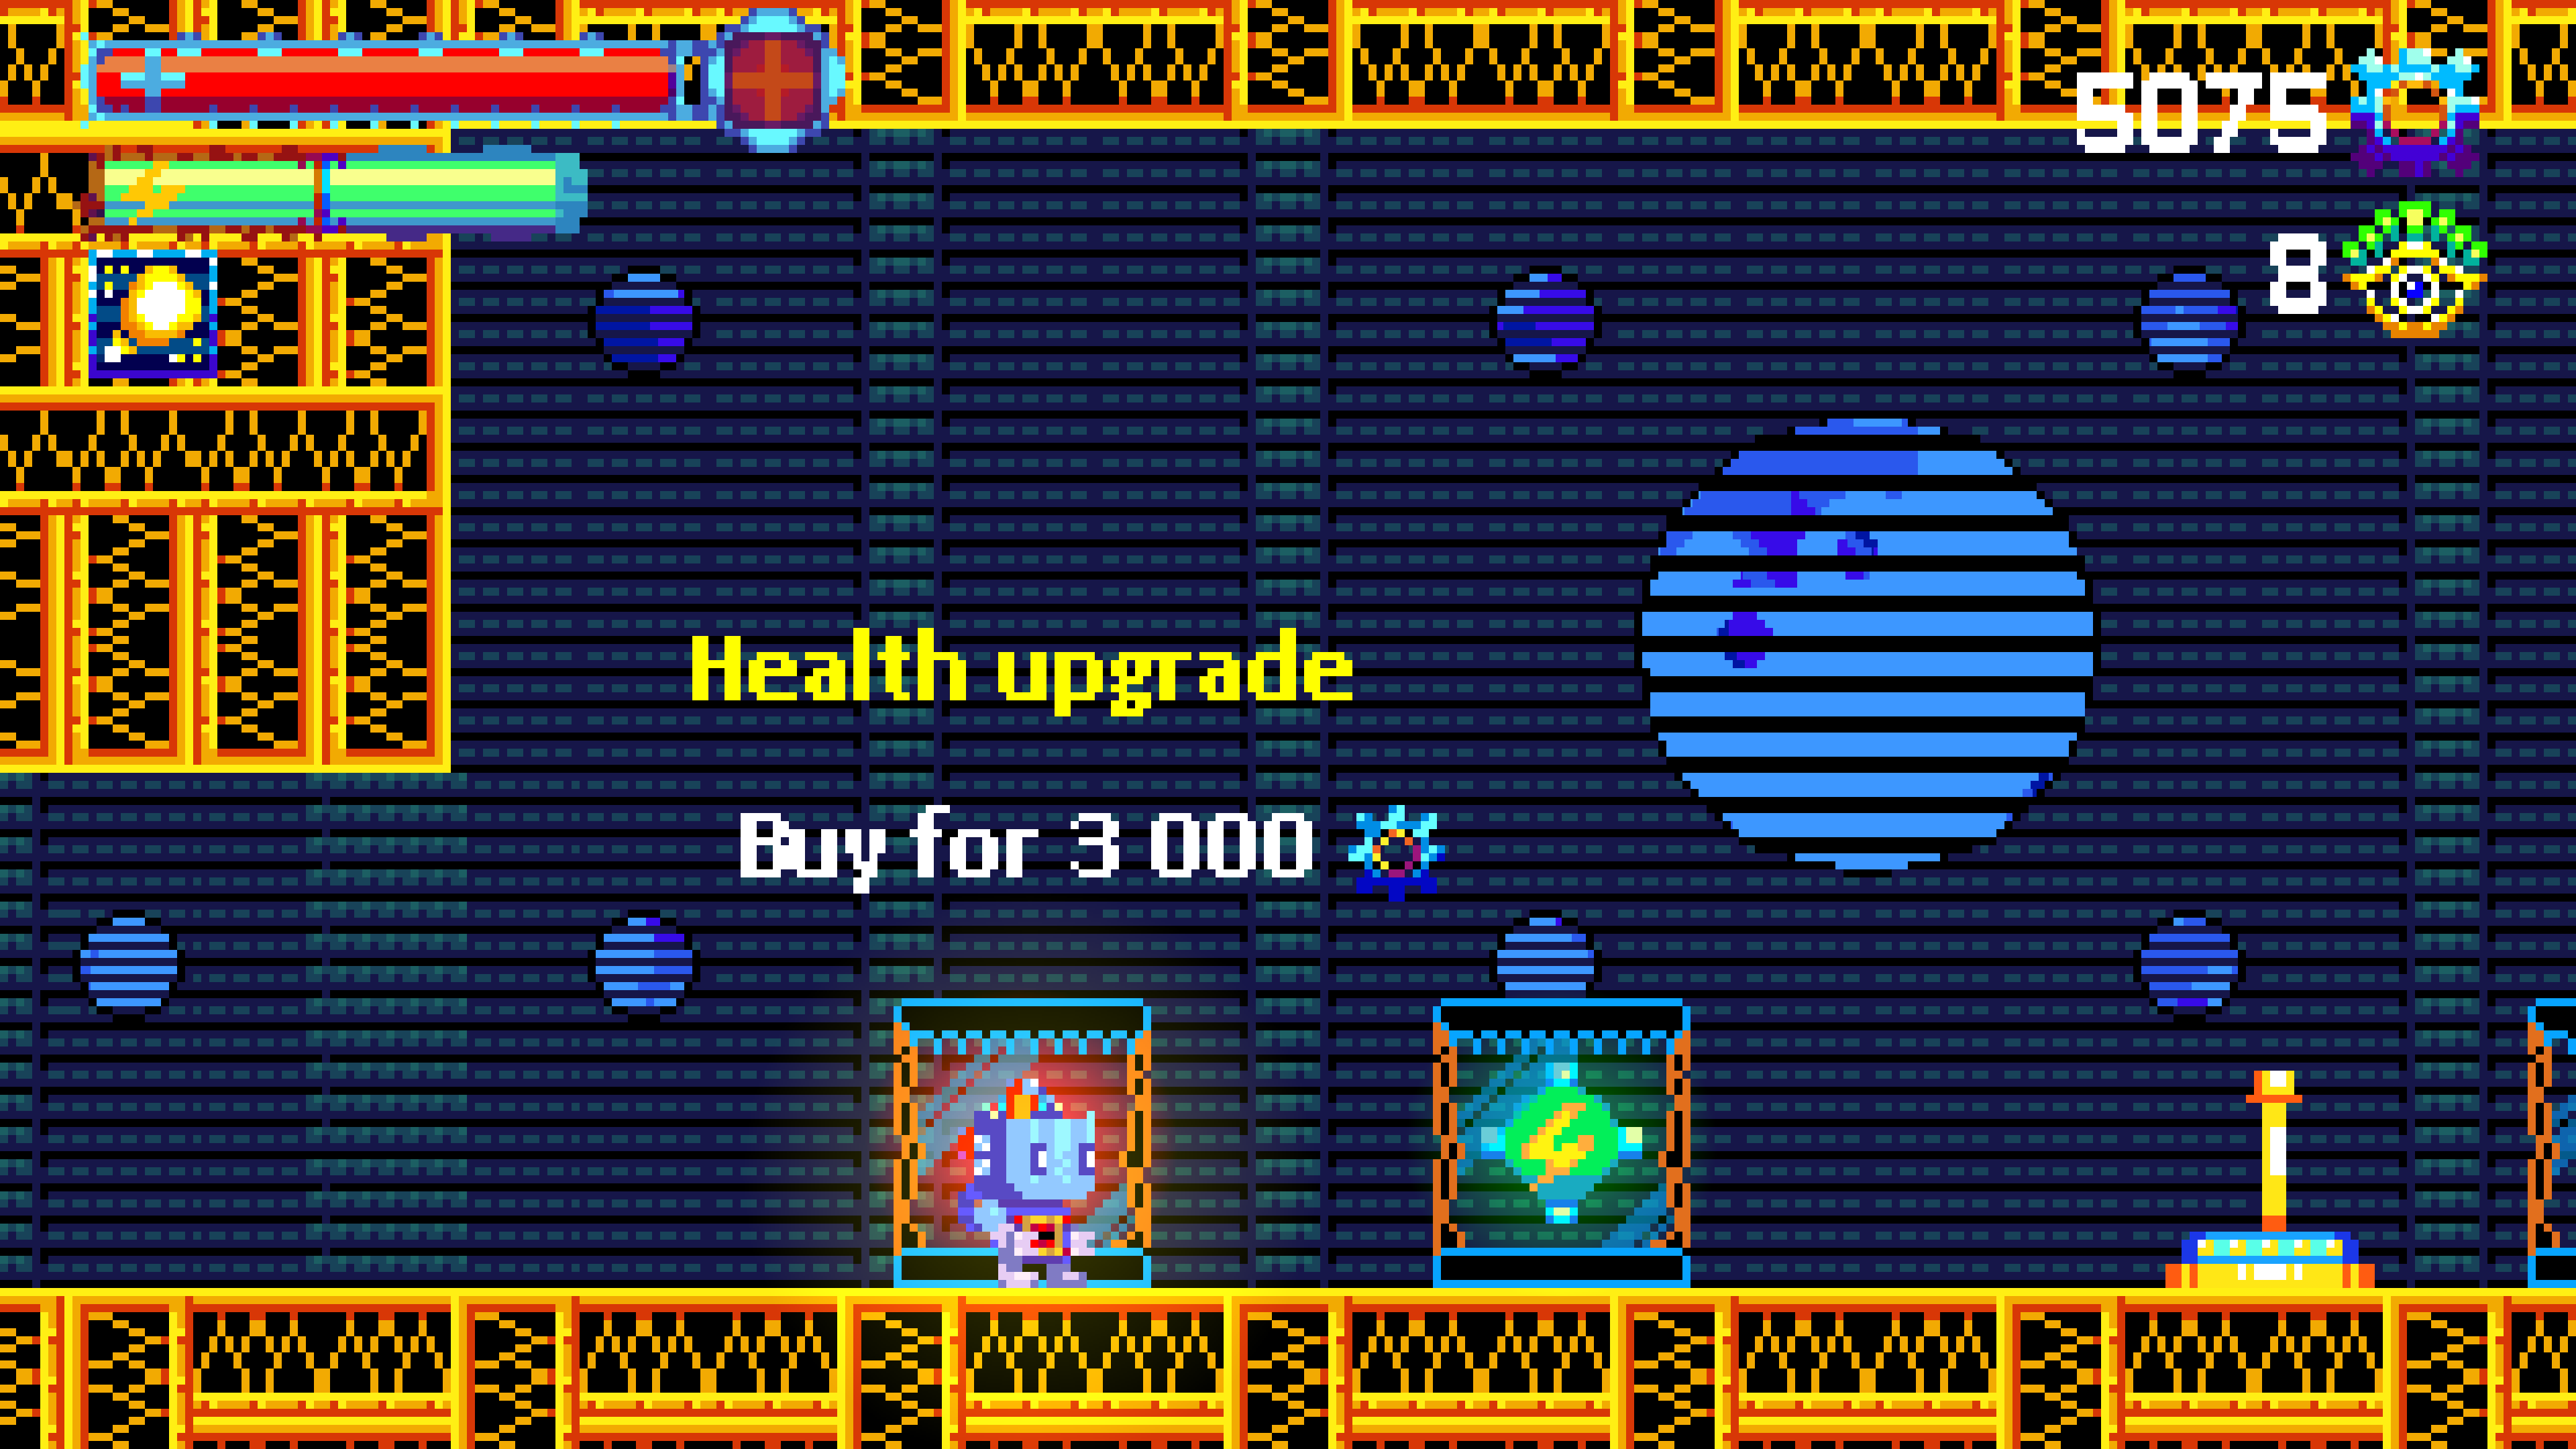 upgrades area where you can purchase upgraded health and energy. The upgrade on show is for health with costs 3,000 of the in game currency